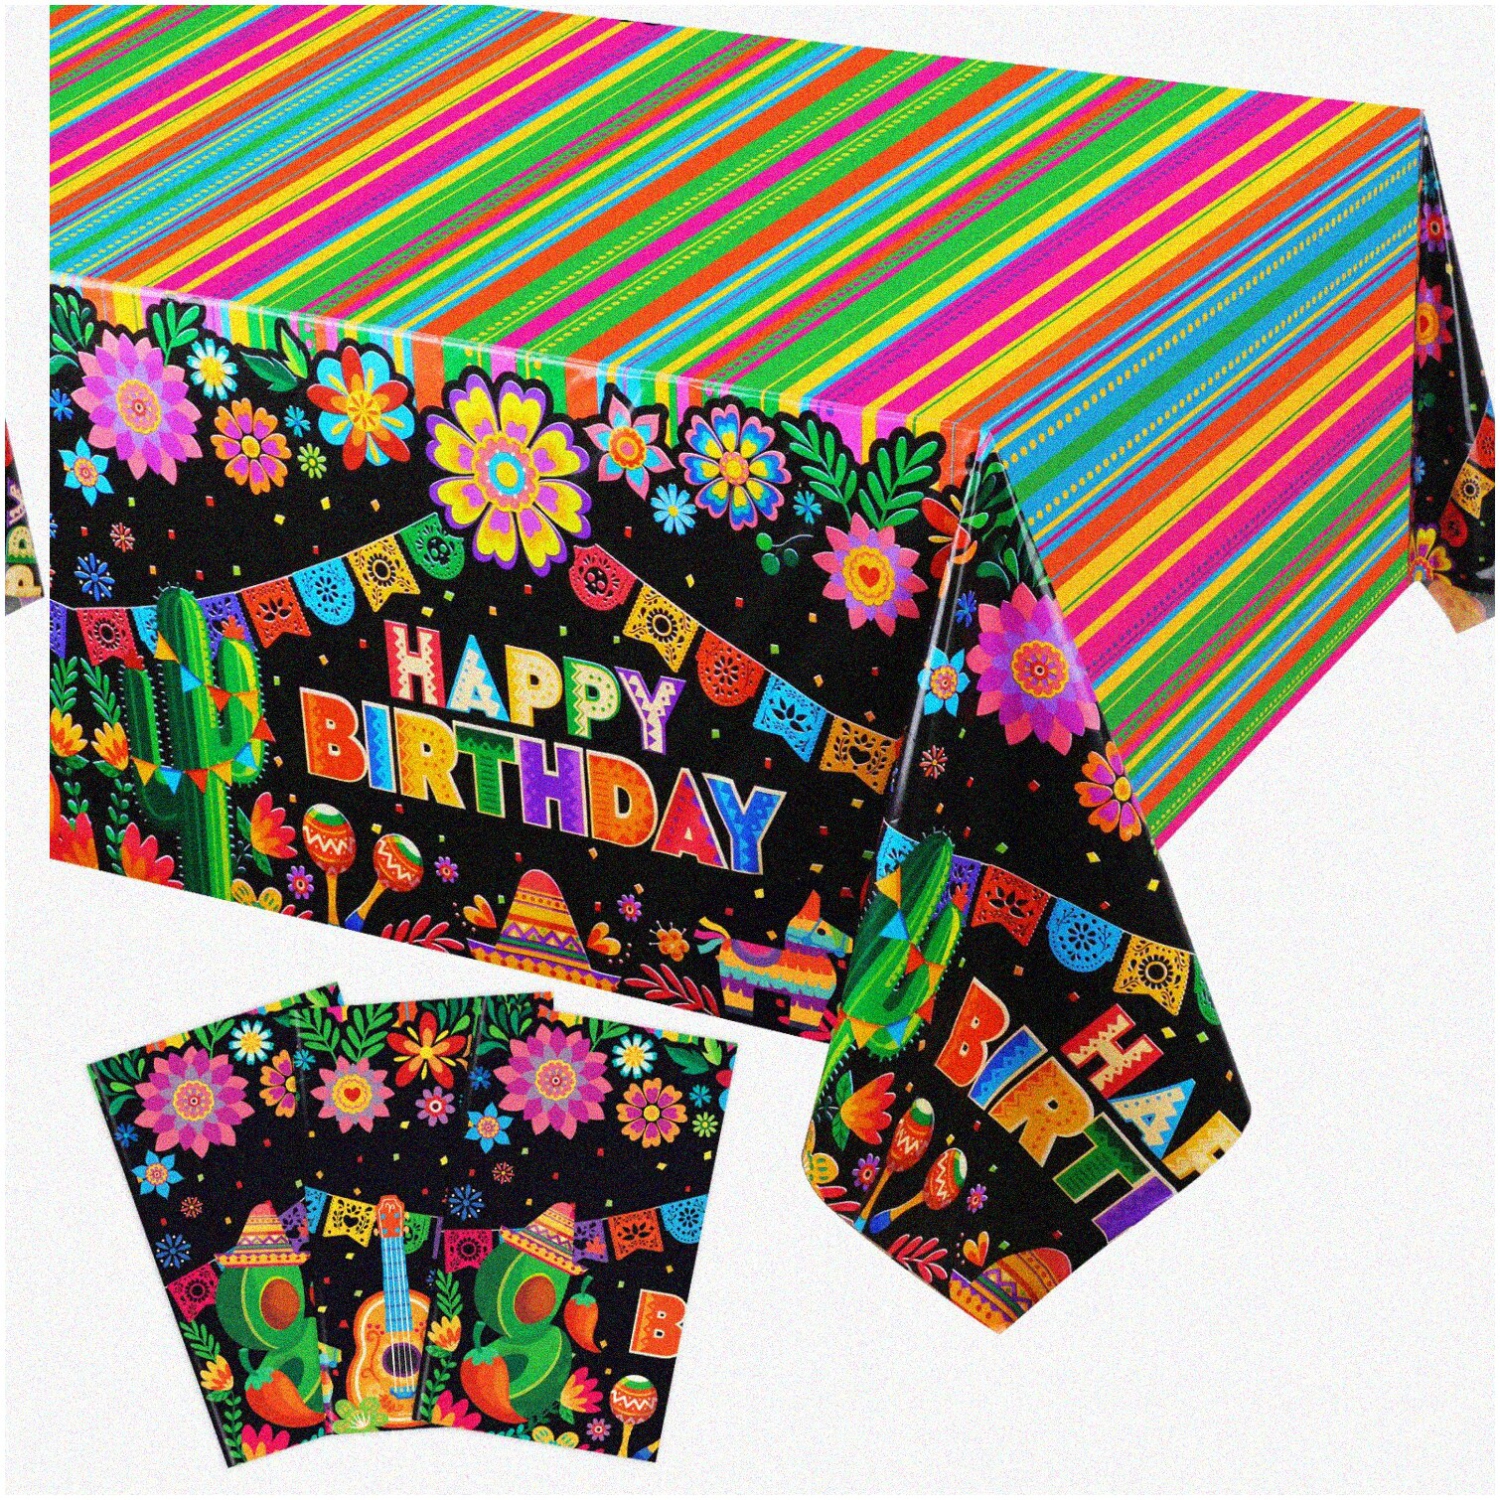 Fiesta Fiesta: Mexicana Taco Night Tablecloth Set - Vibrant Mexican Style Stripes for Cinco De Mayo & Birthday Party Decorations!